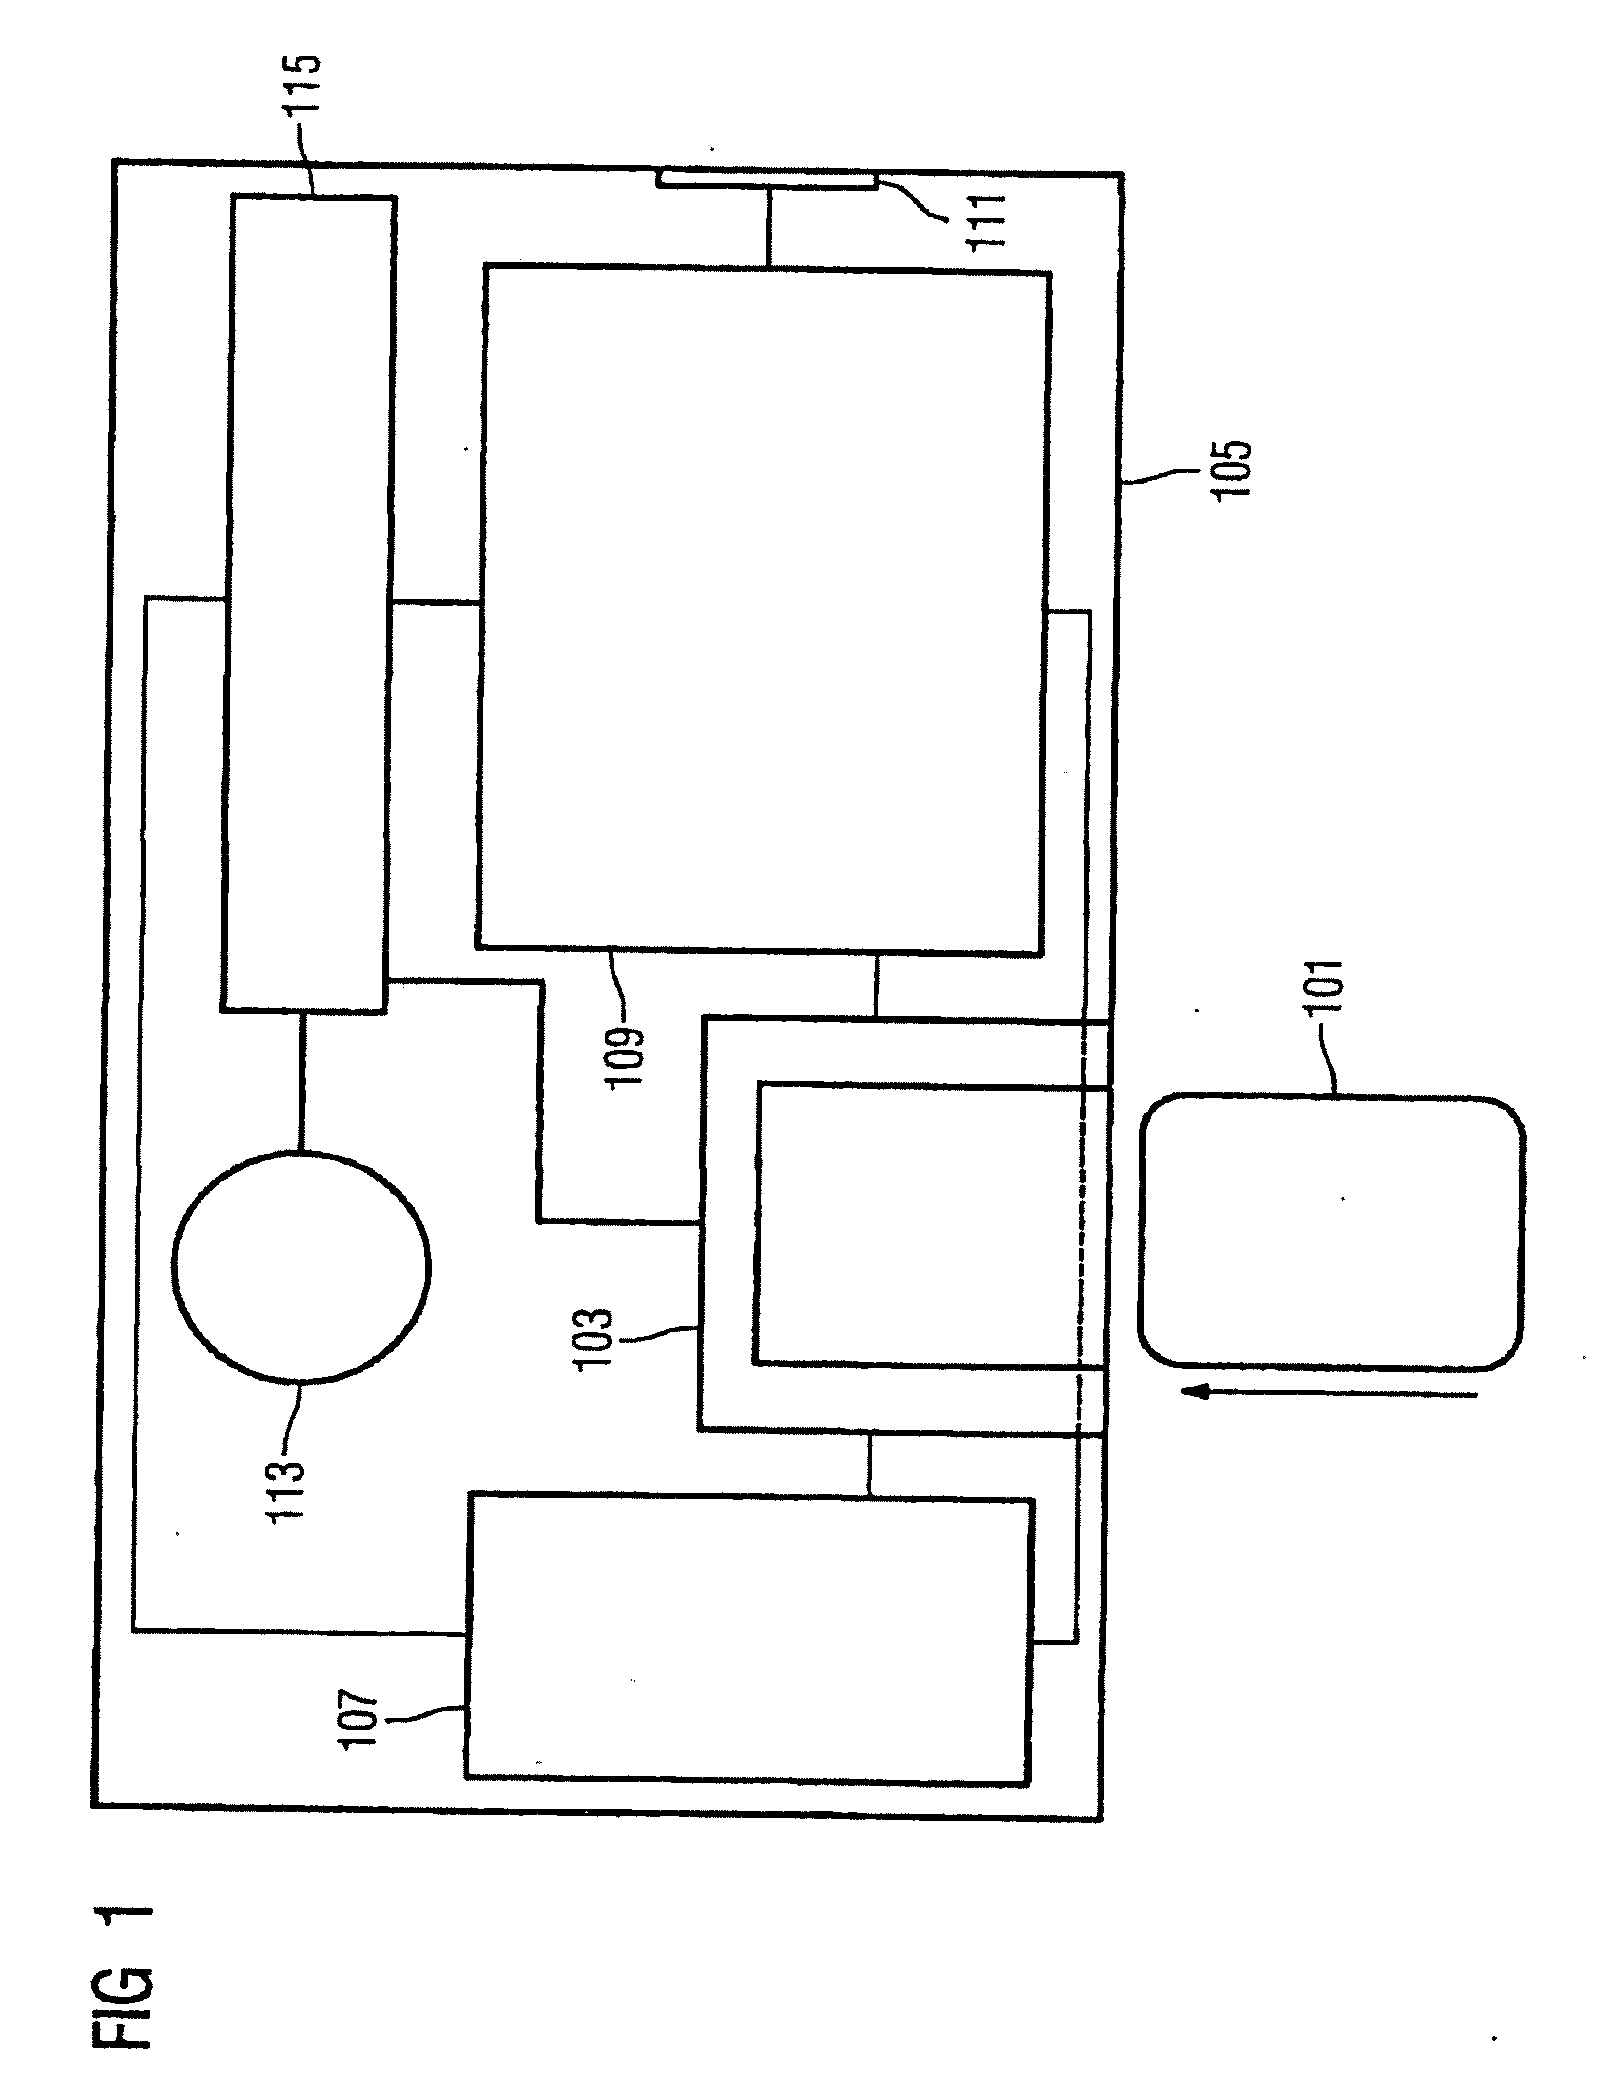 System for operating a system for the integrated and automated analysis of DNA or protein